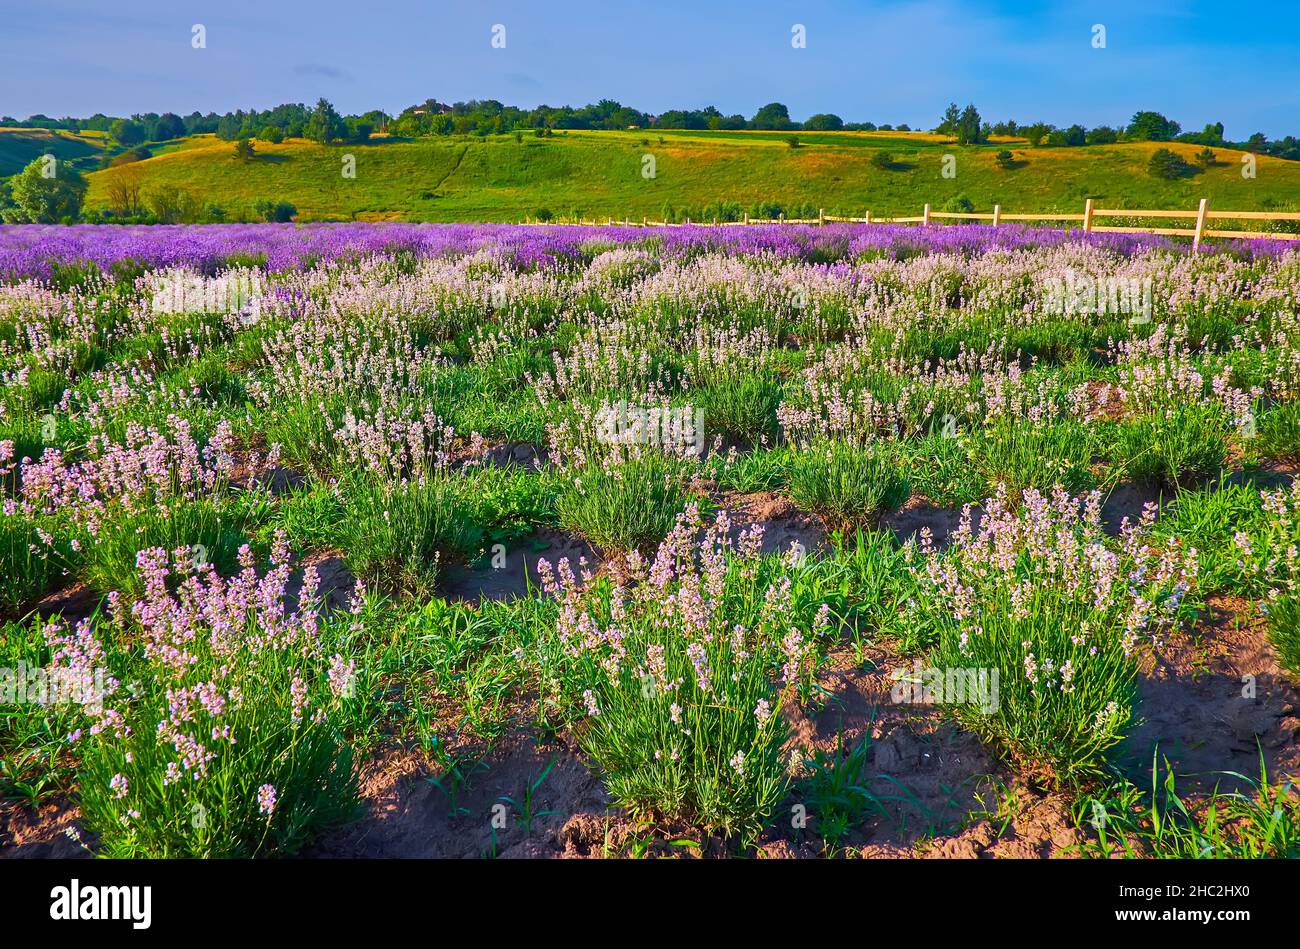 The rows of blooming white Nana Alba lavender in the field with bright purple plants in the background Stock Photo